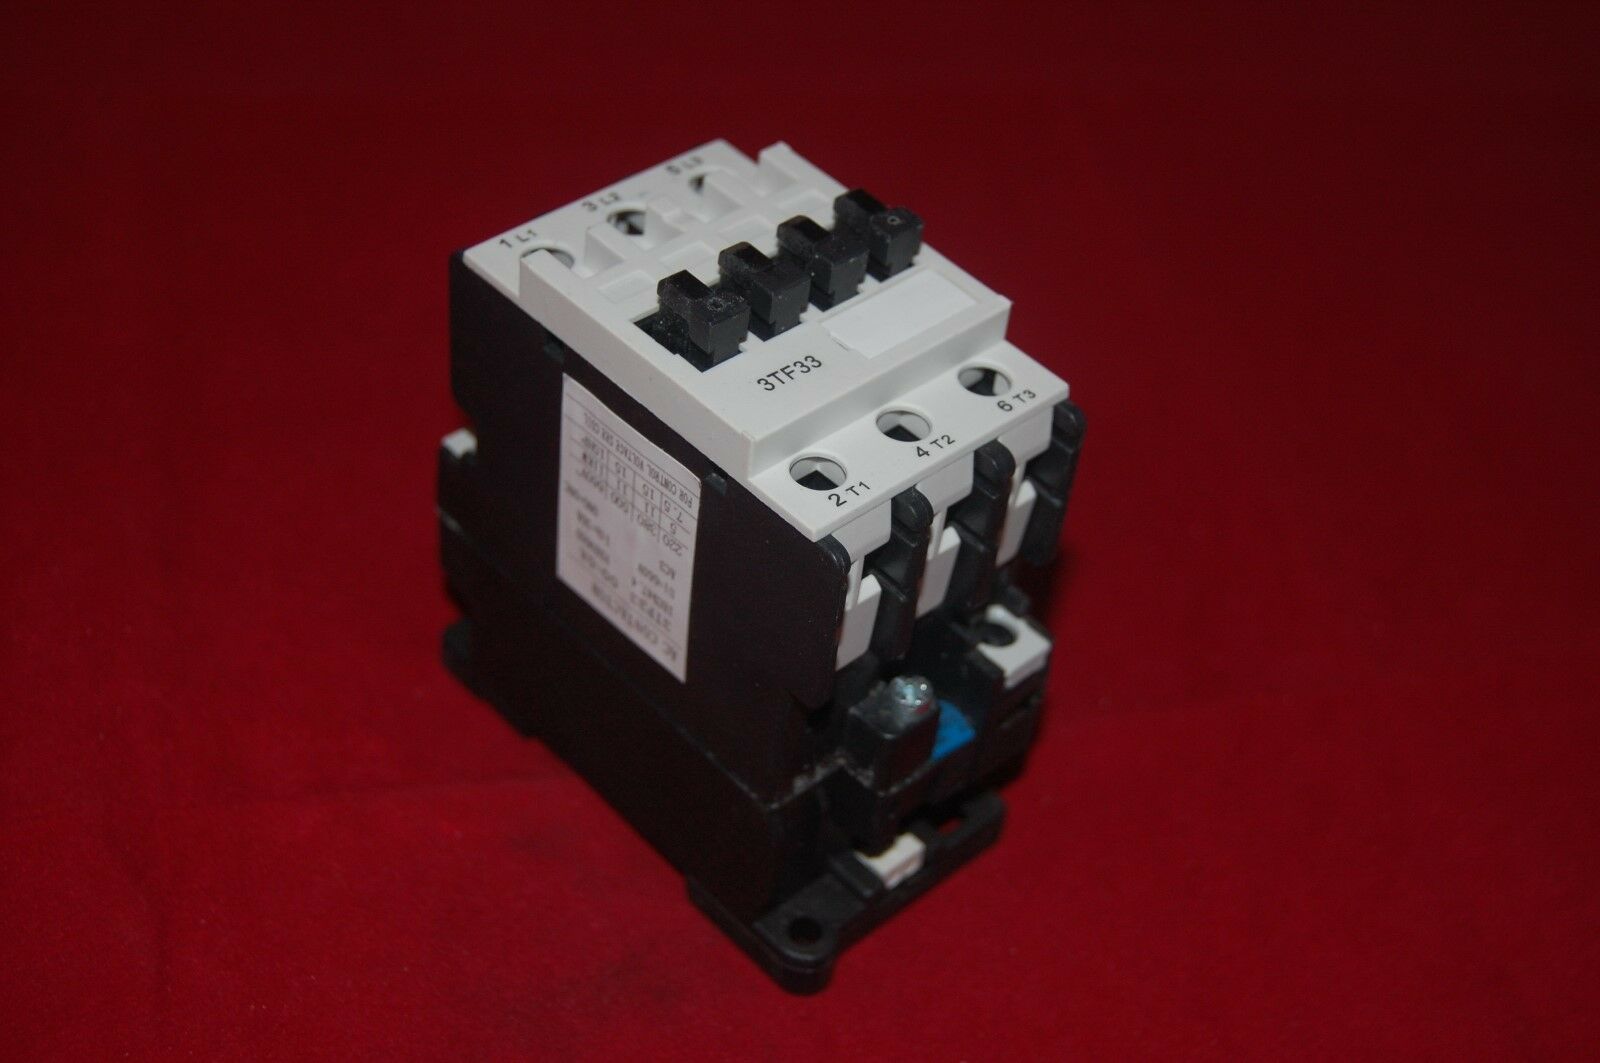 1pc New FITS 3TF33 00 AC CONTACTOR 22A COIL 220V AC 50/60HZ